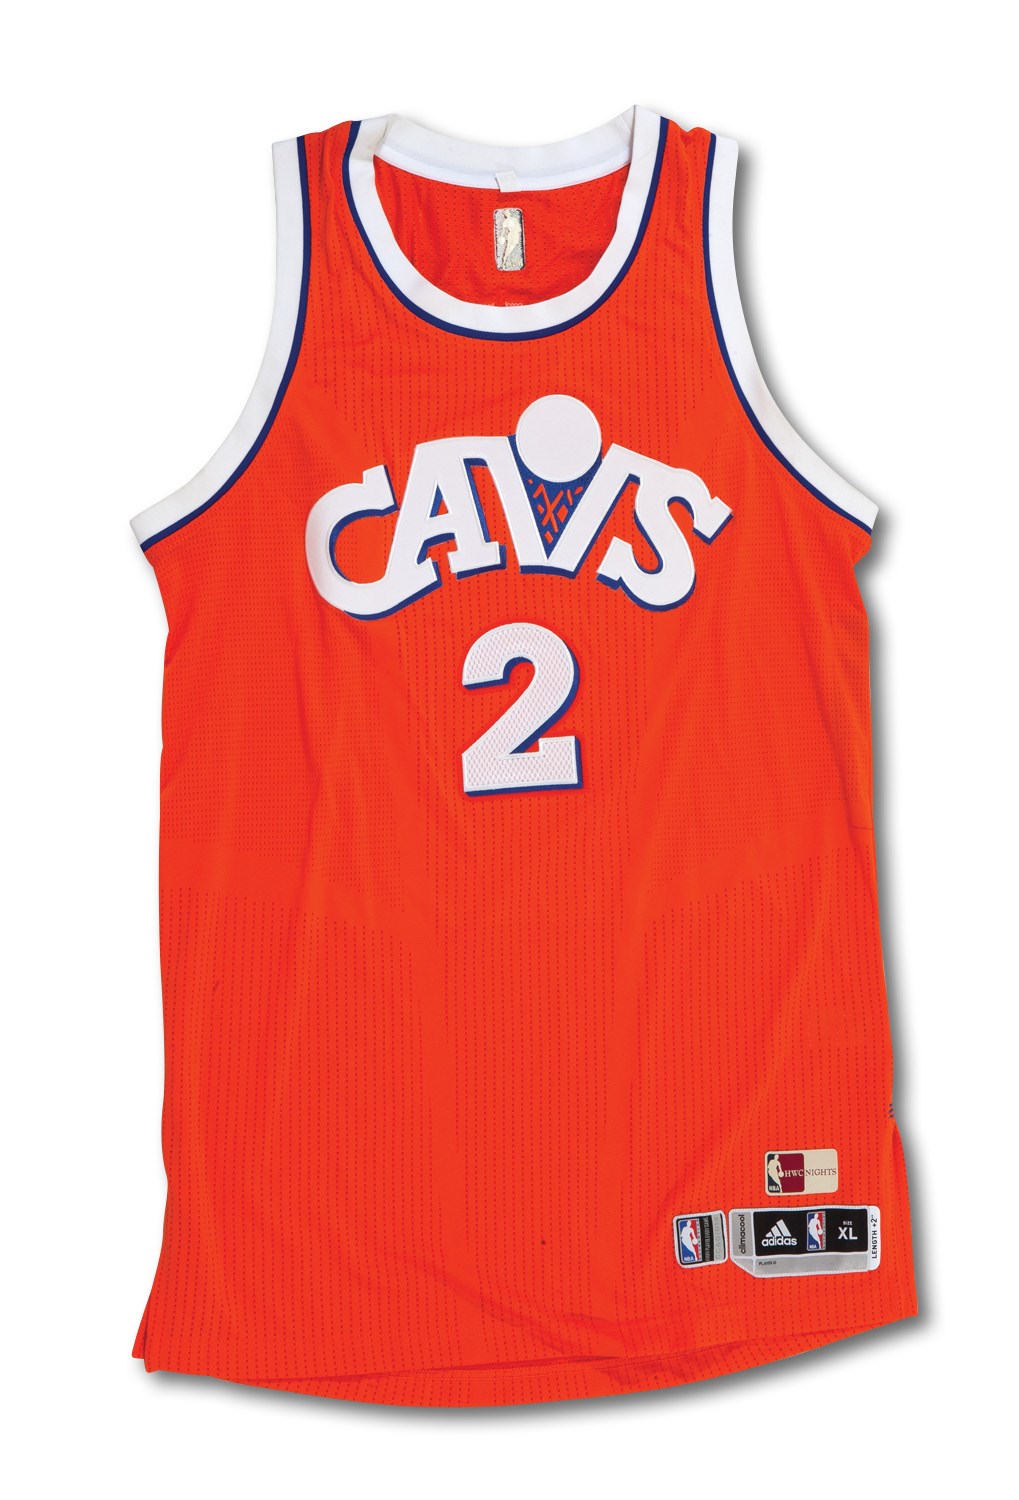 kyrie irving game used jersey